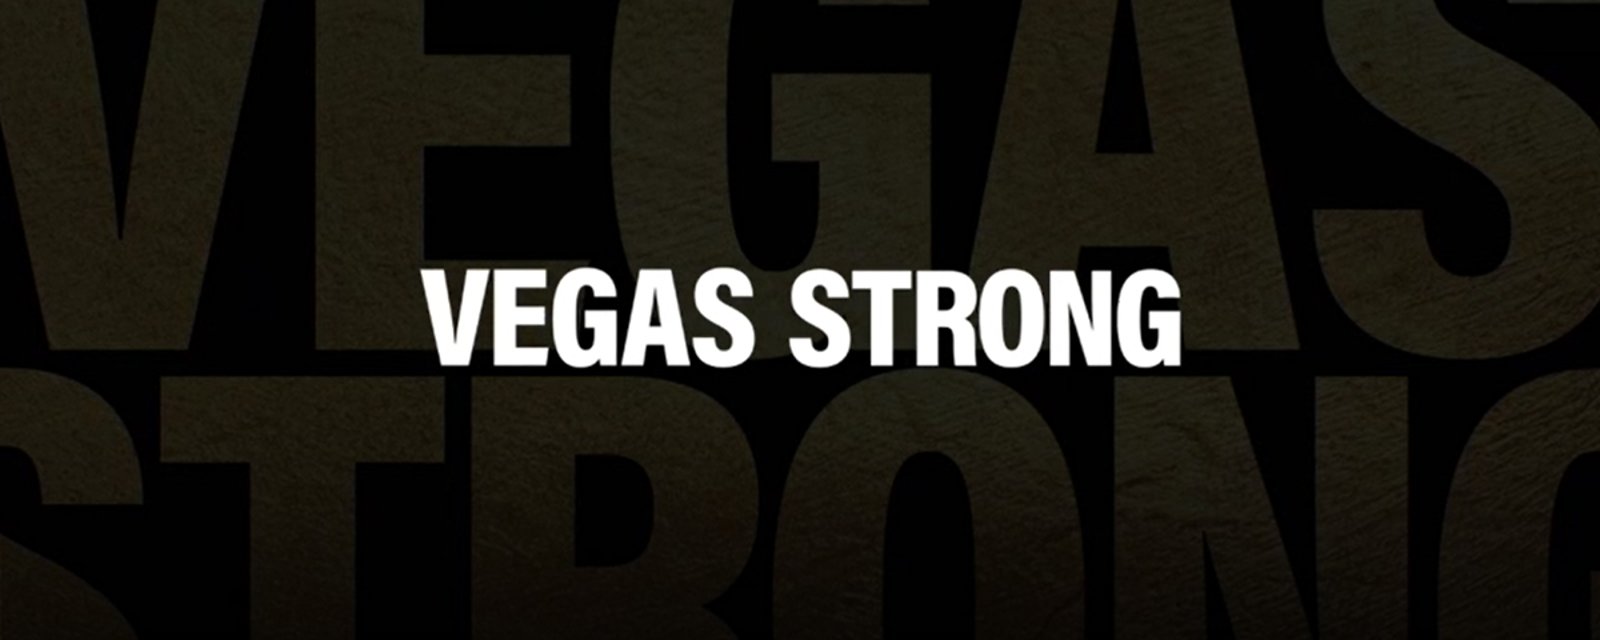 Must see: NHL releases heartwarming video in support of 'Vegas Strong'